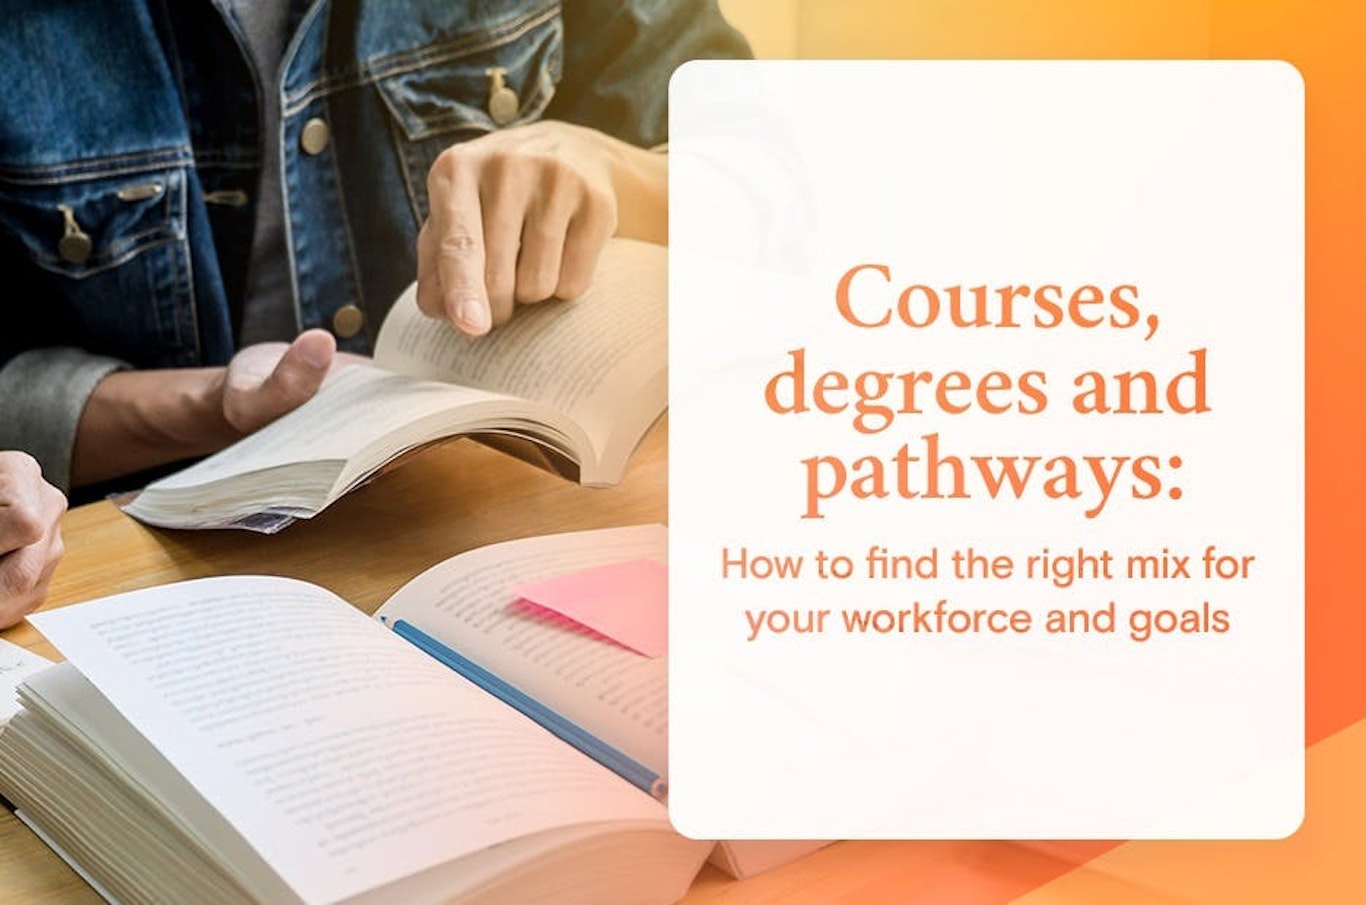 courses degrees and pathways image